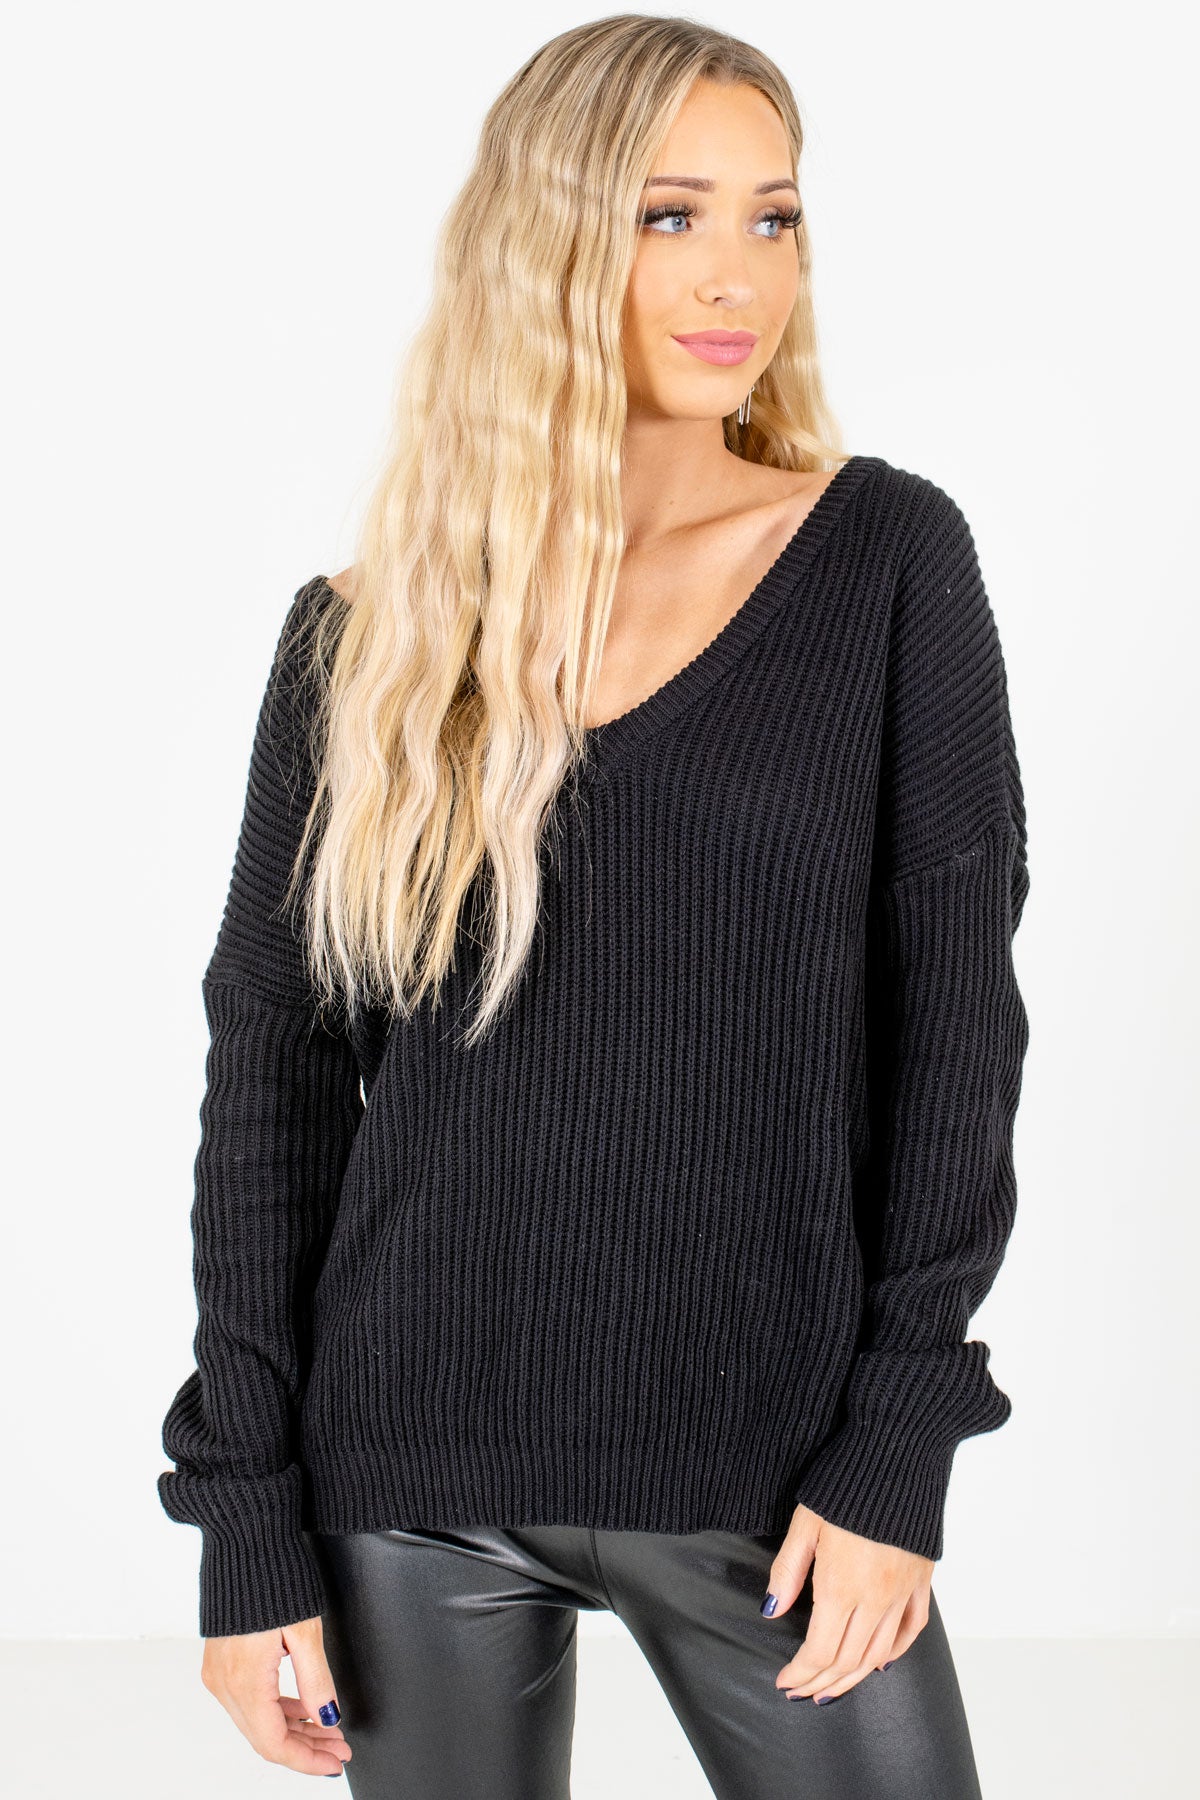 Back to Black! 🖤 You can shop our Fringy knit sweater dress in 2